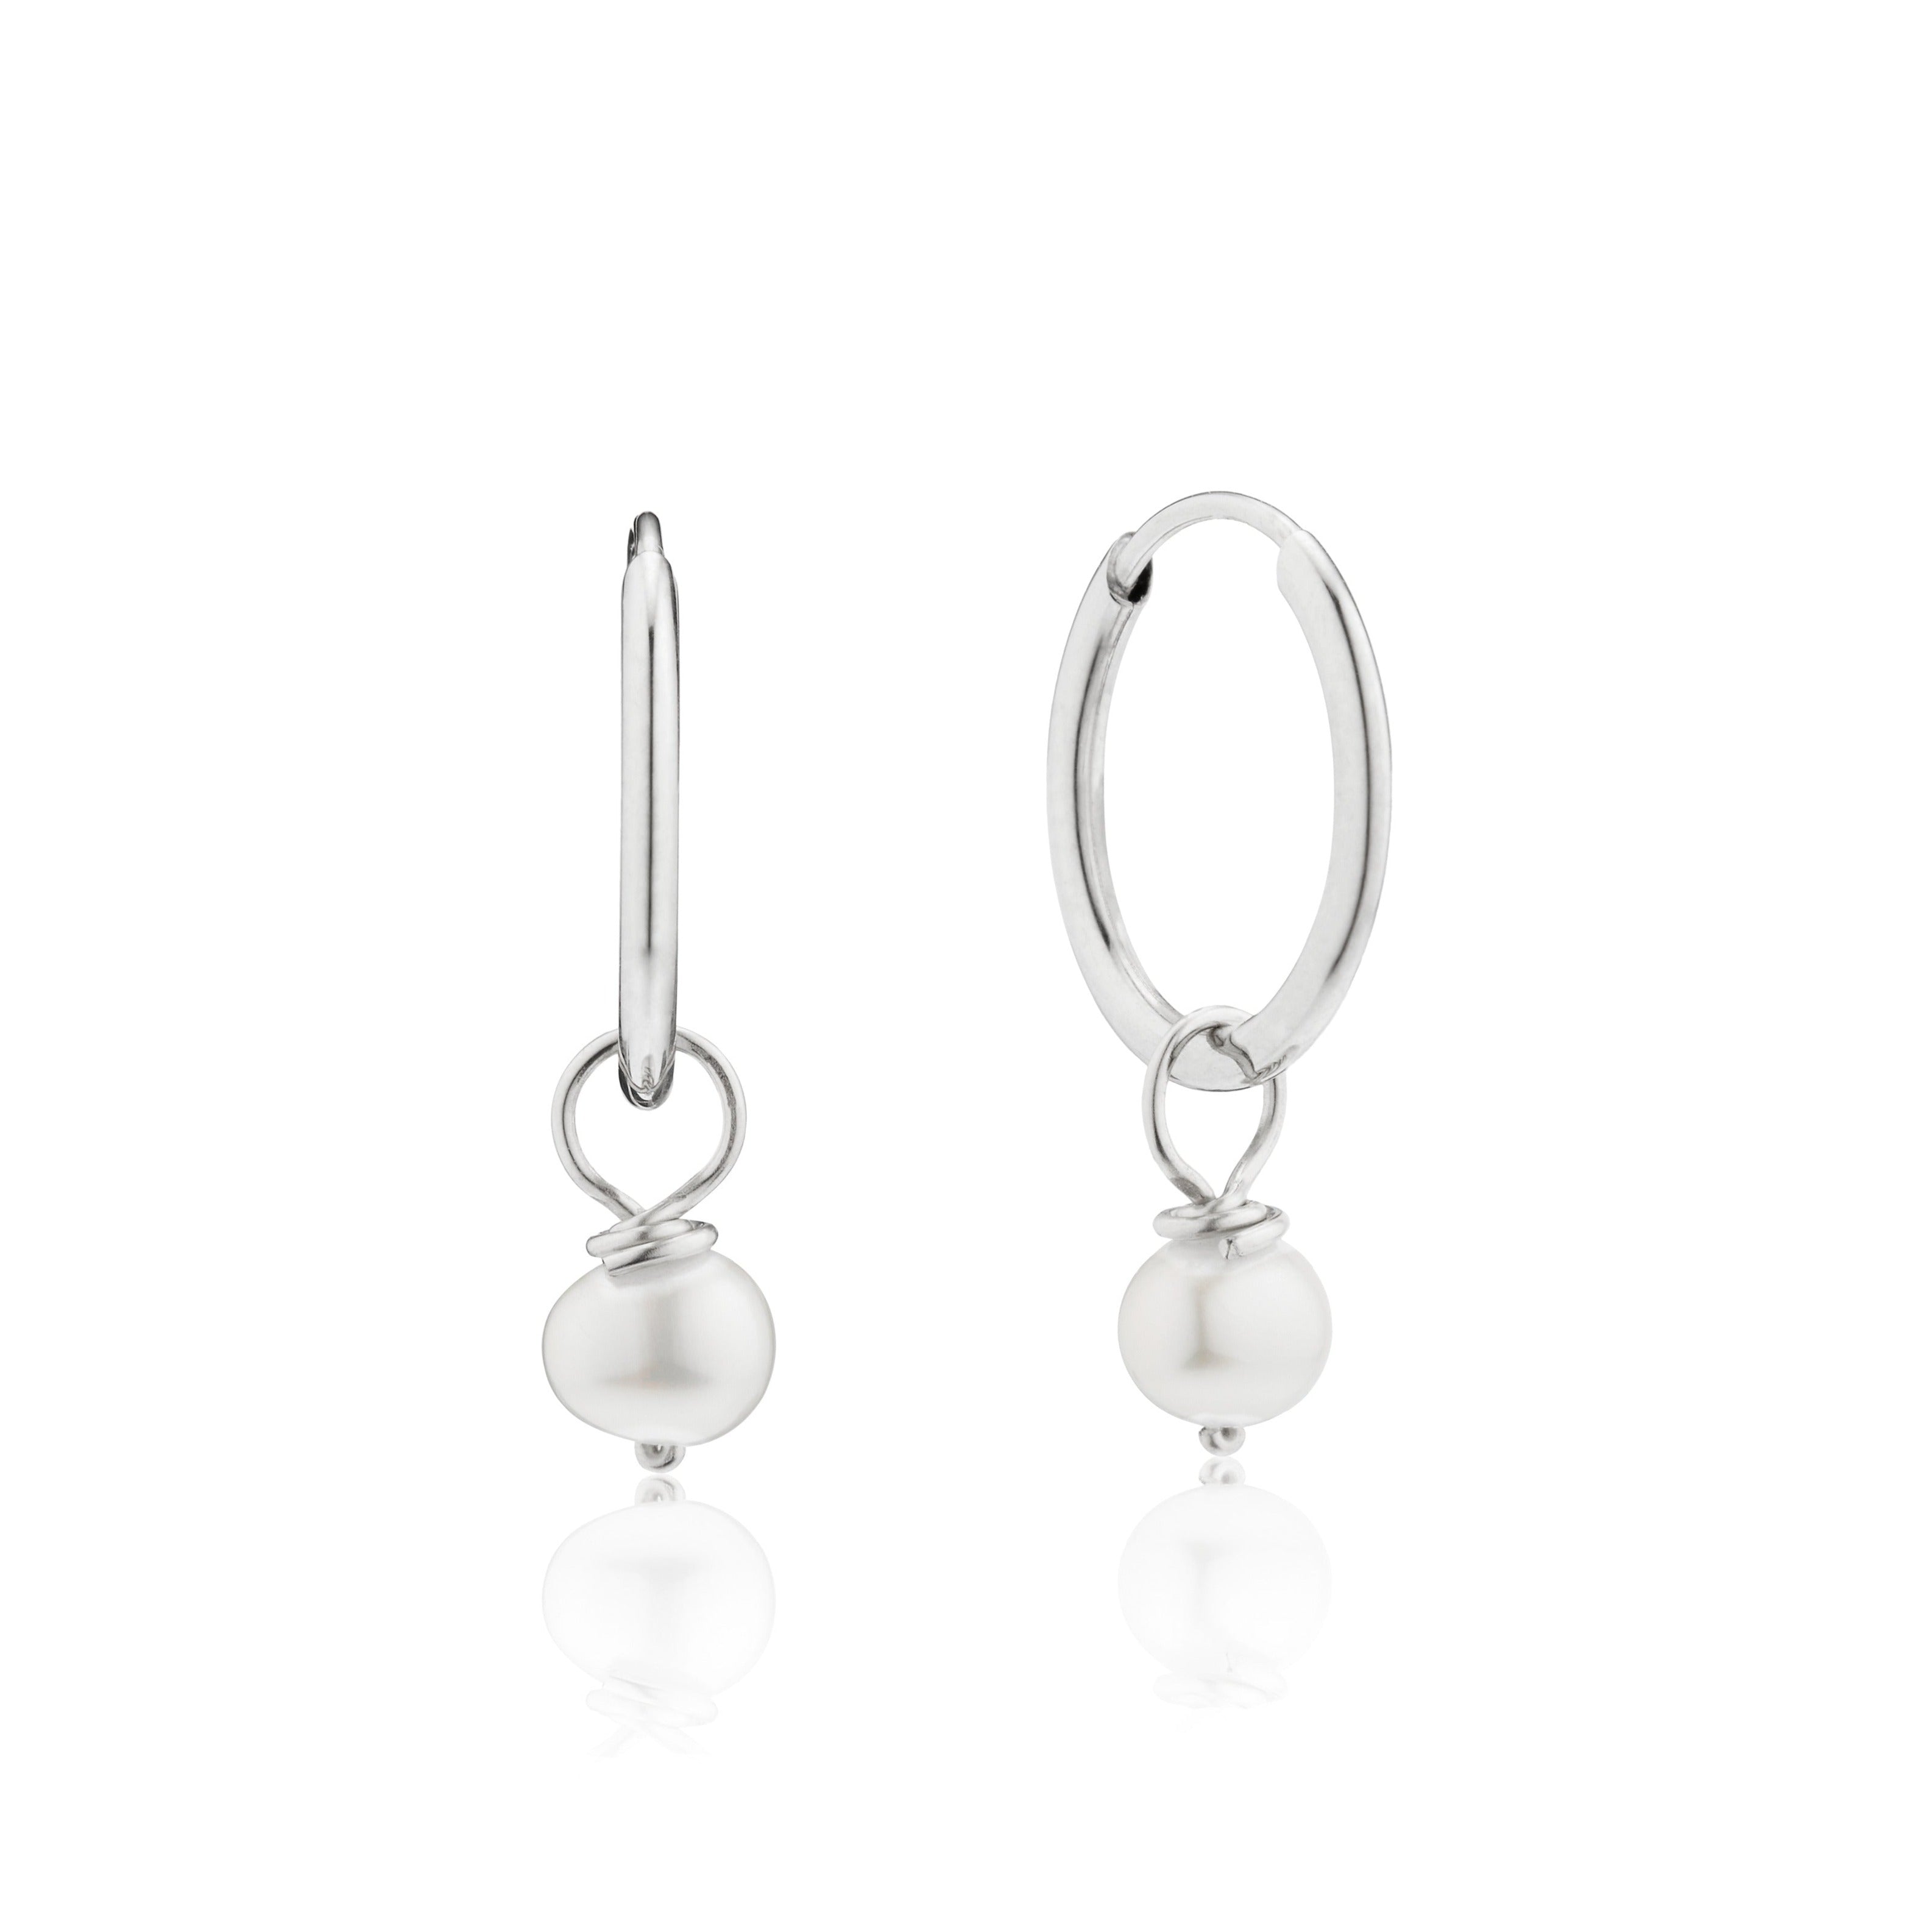 Silver small pearl drop hoop earrings on a white background